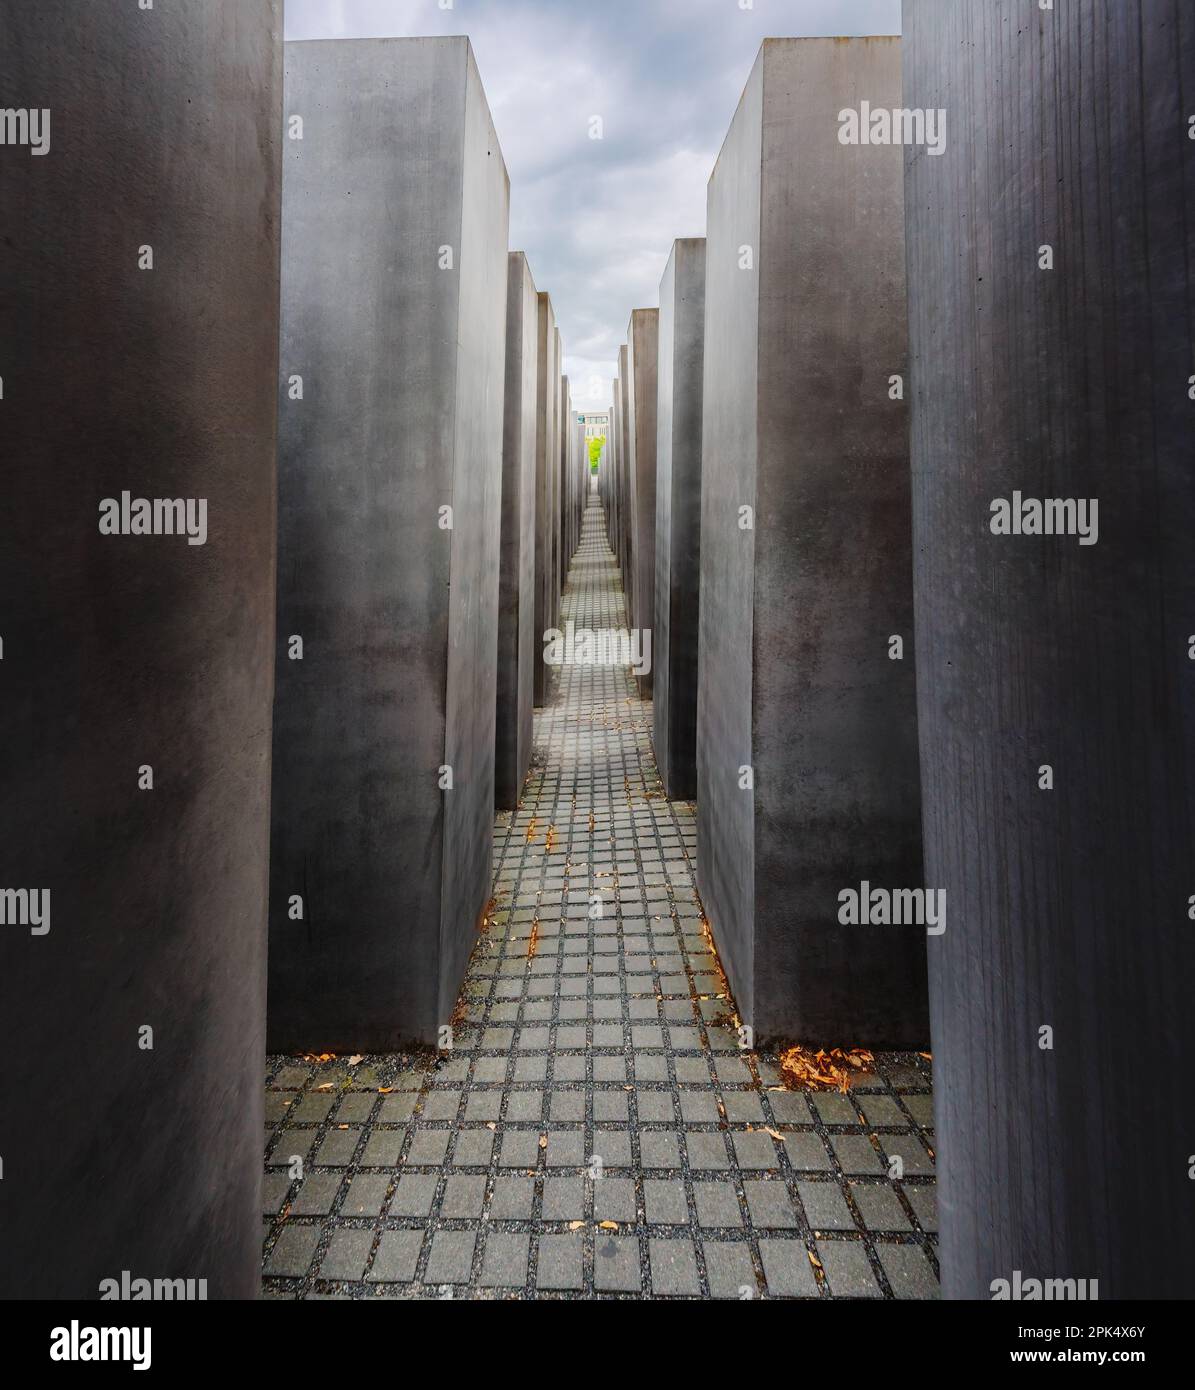 Memorial to the Murdered Jews of Europe - Berlin, Germany Stock Photo